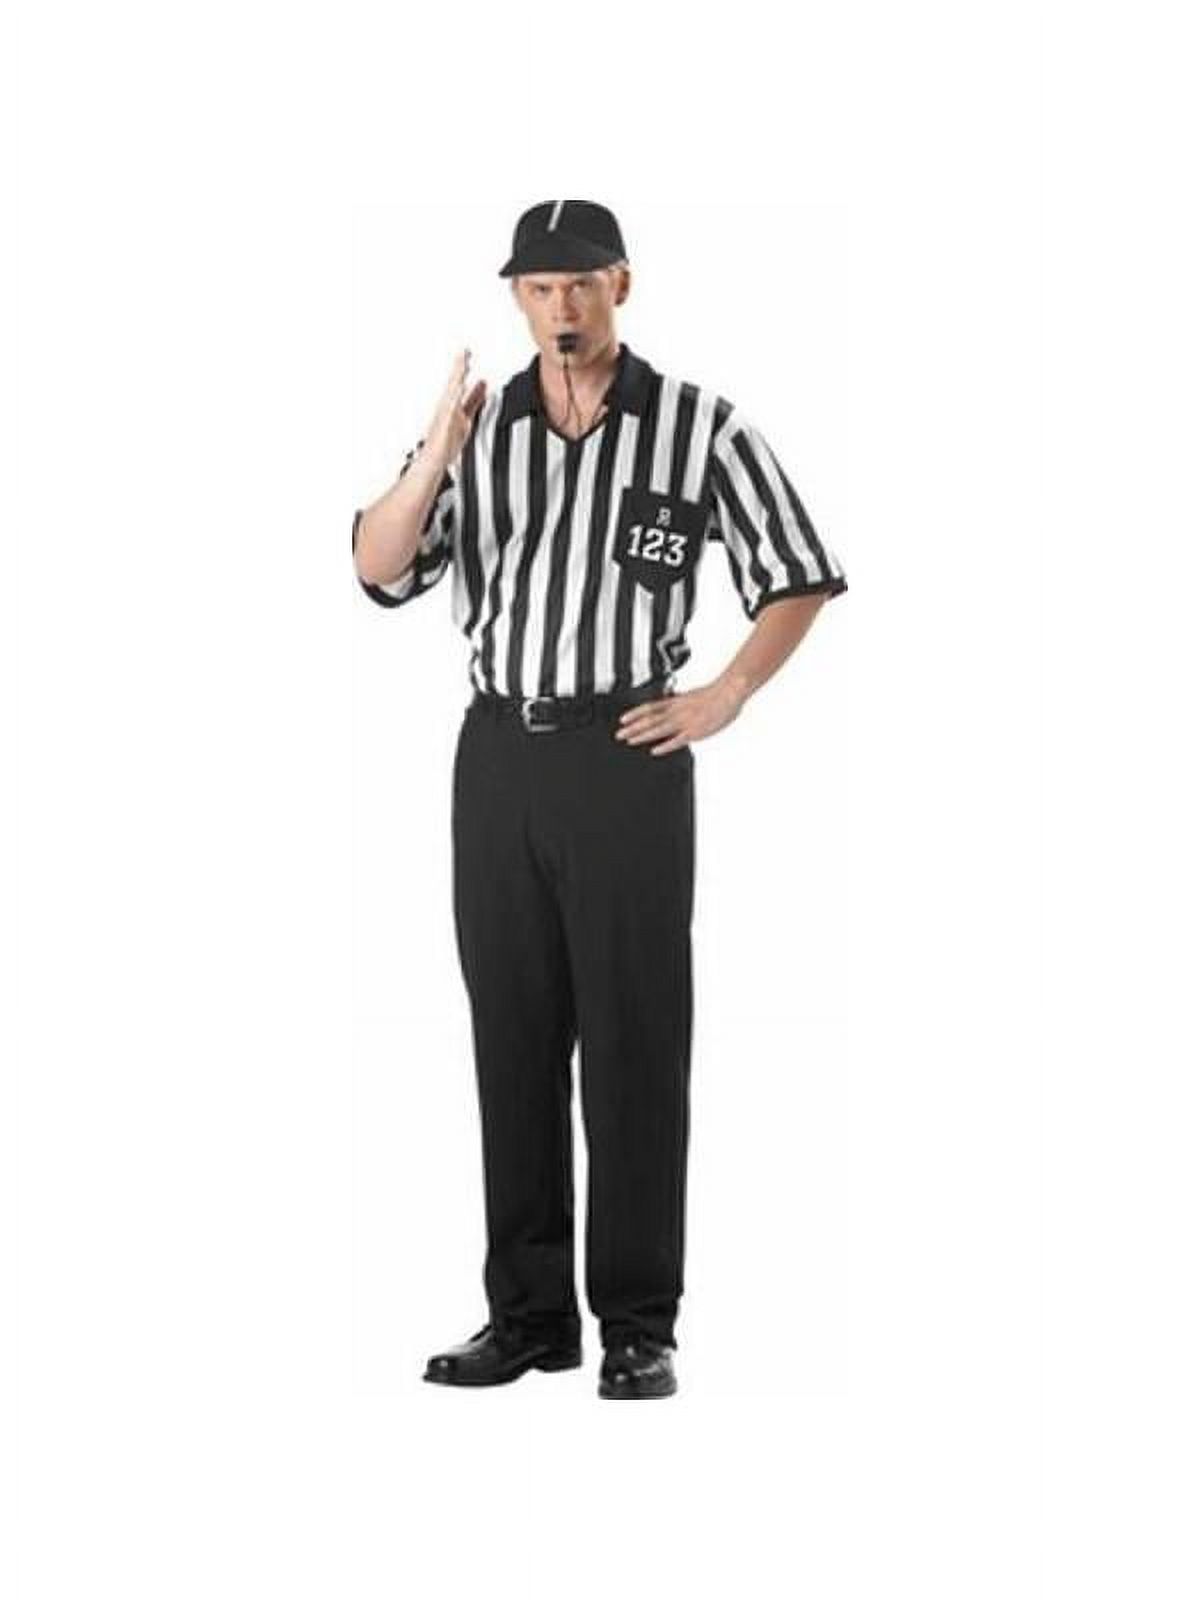 Referee Shirt and Cap Mens Halloween Costume Large 42-44 - image 1 of 2